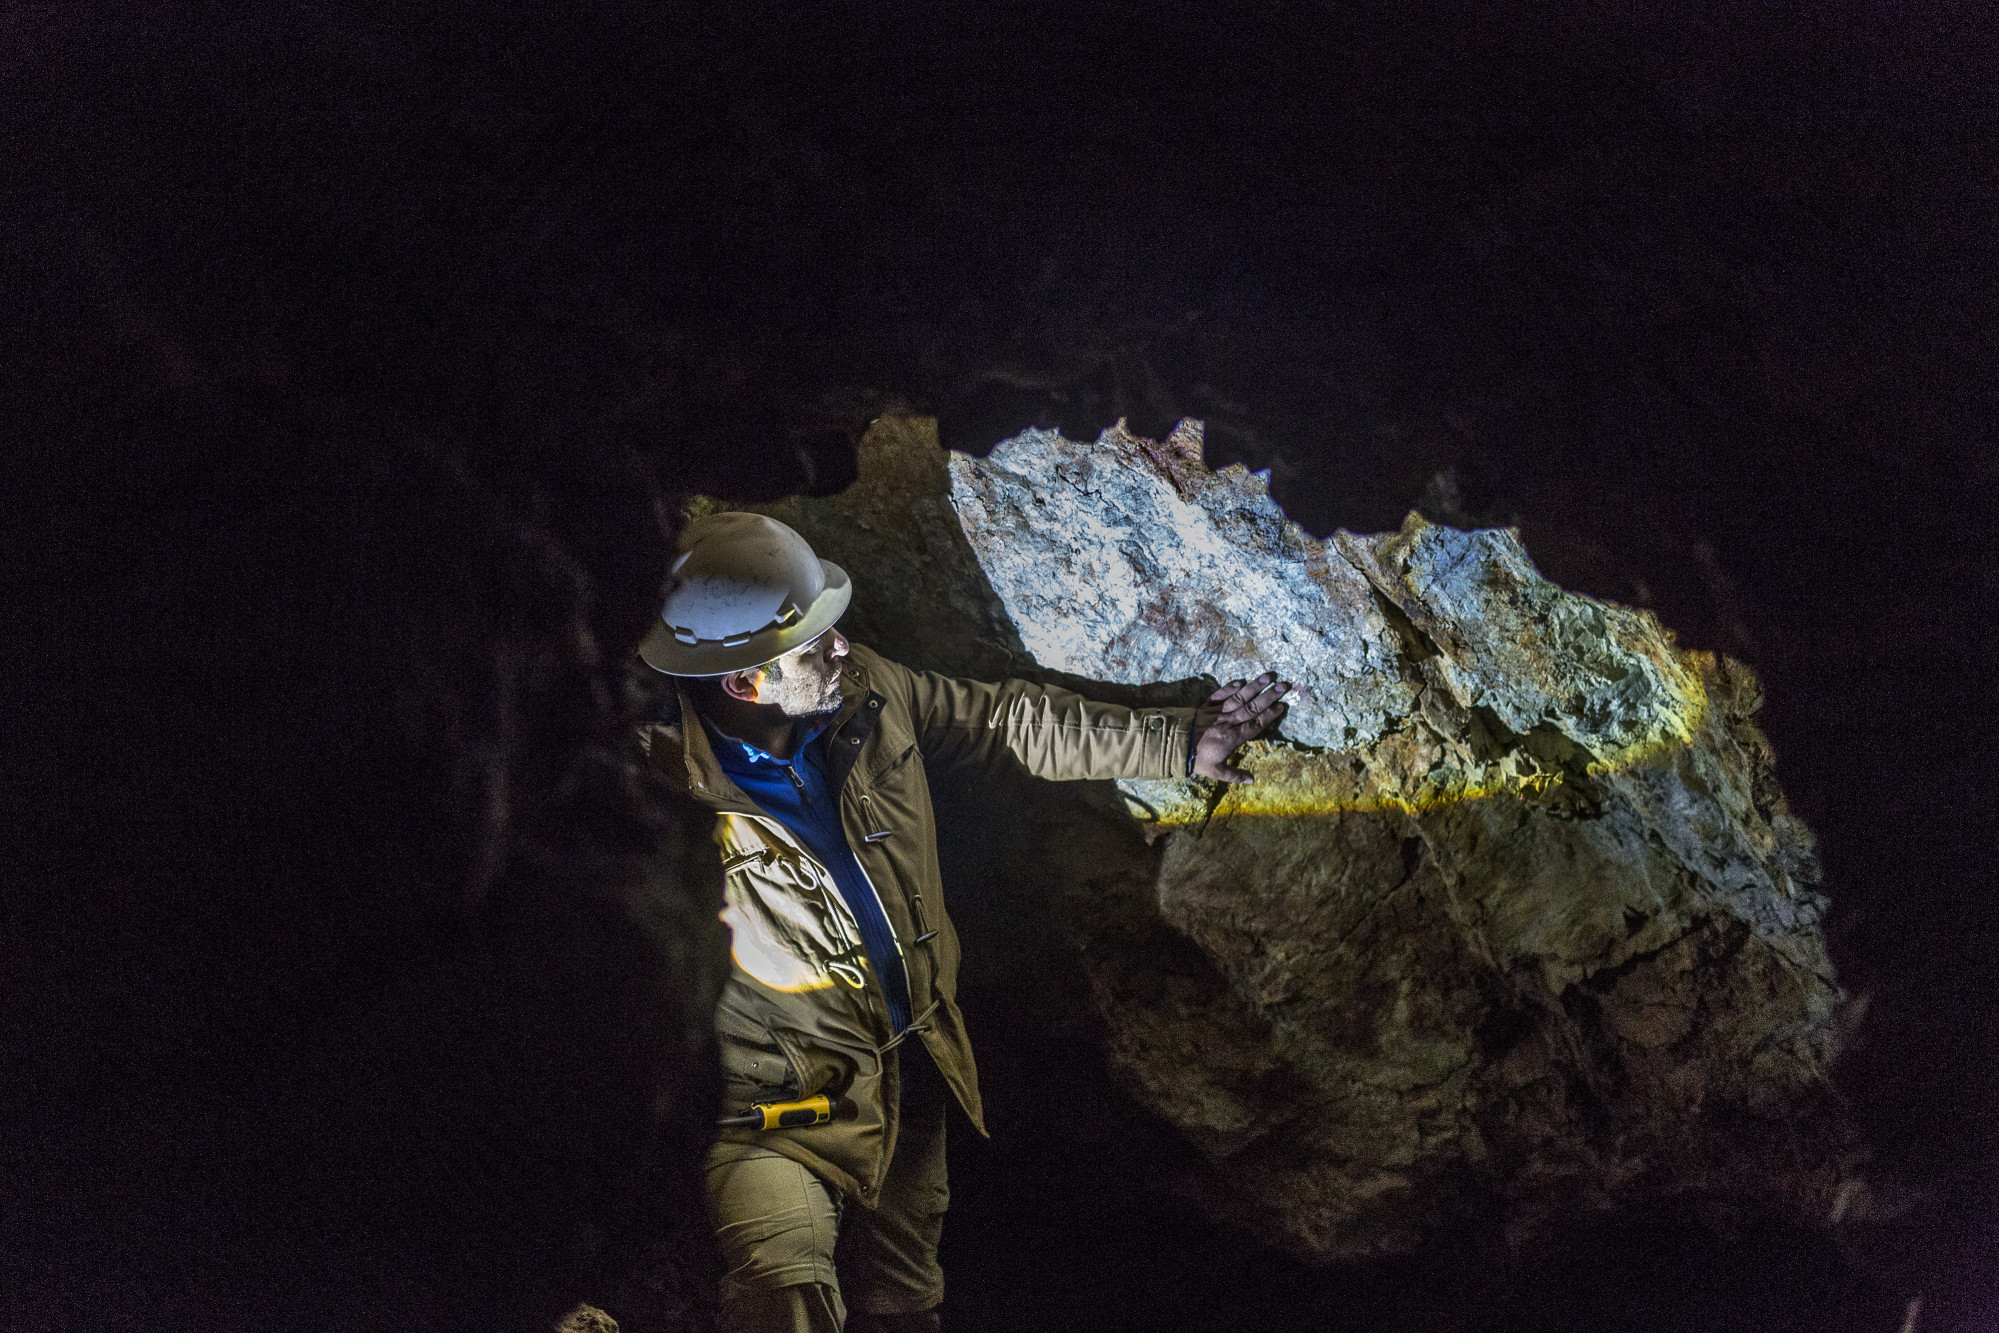 A miner inspects the inside of a cobalt mine in La Cobaltera, Atacama Region, Chile.